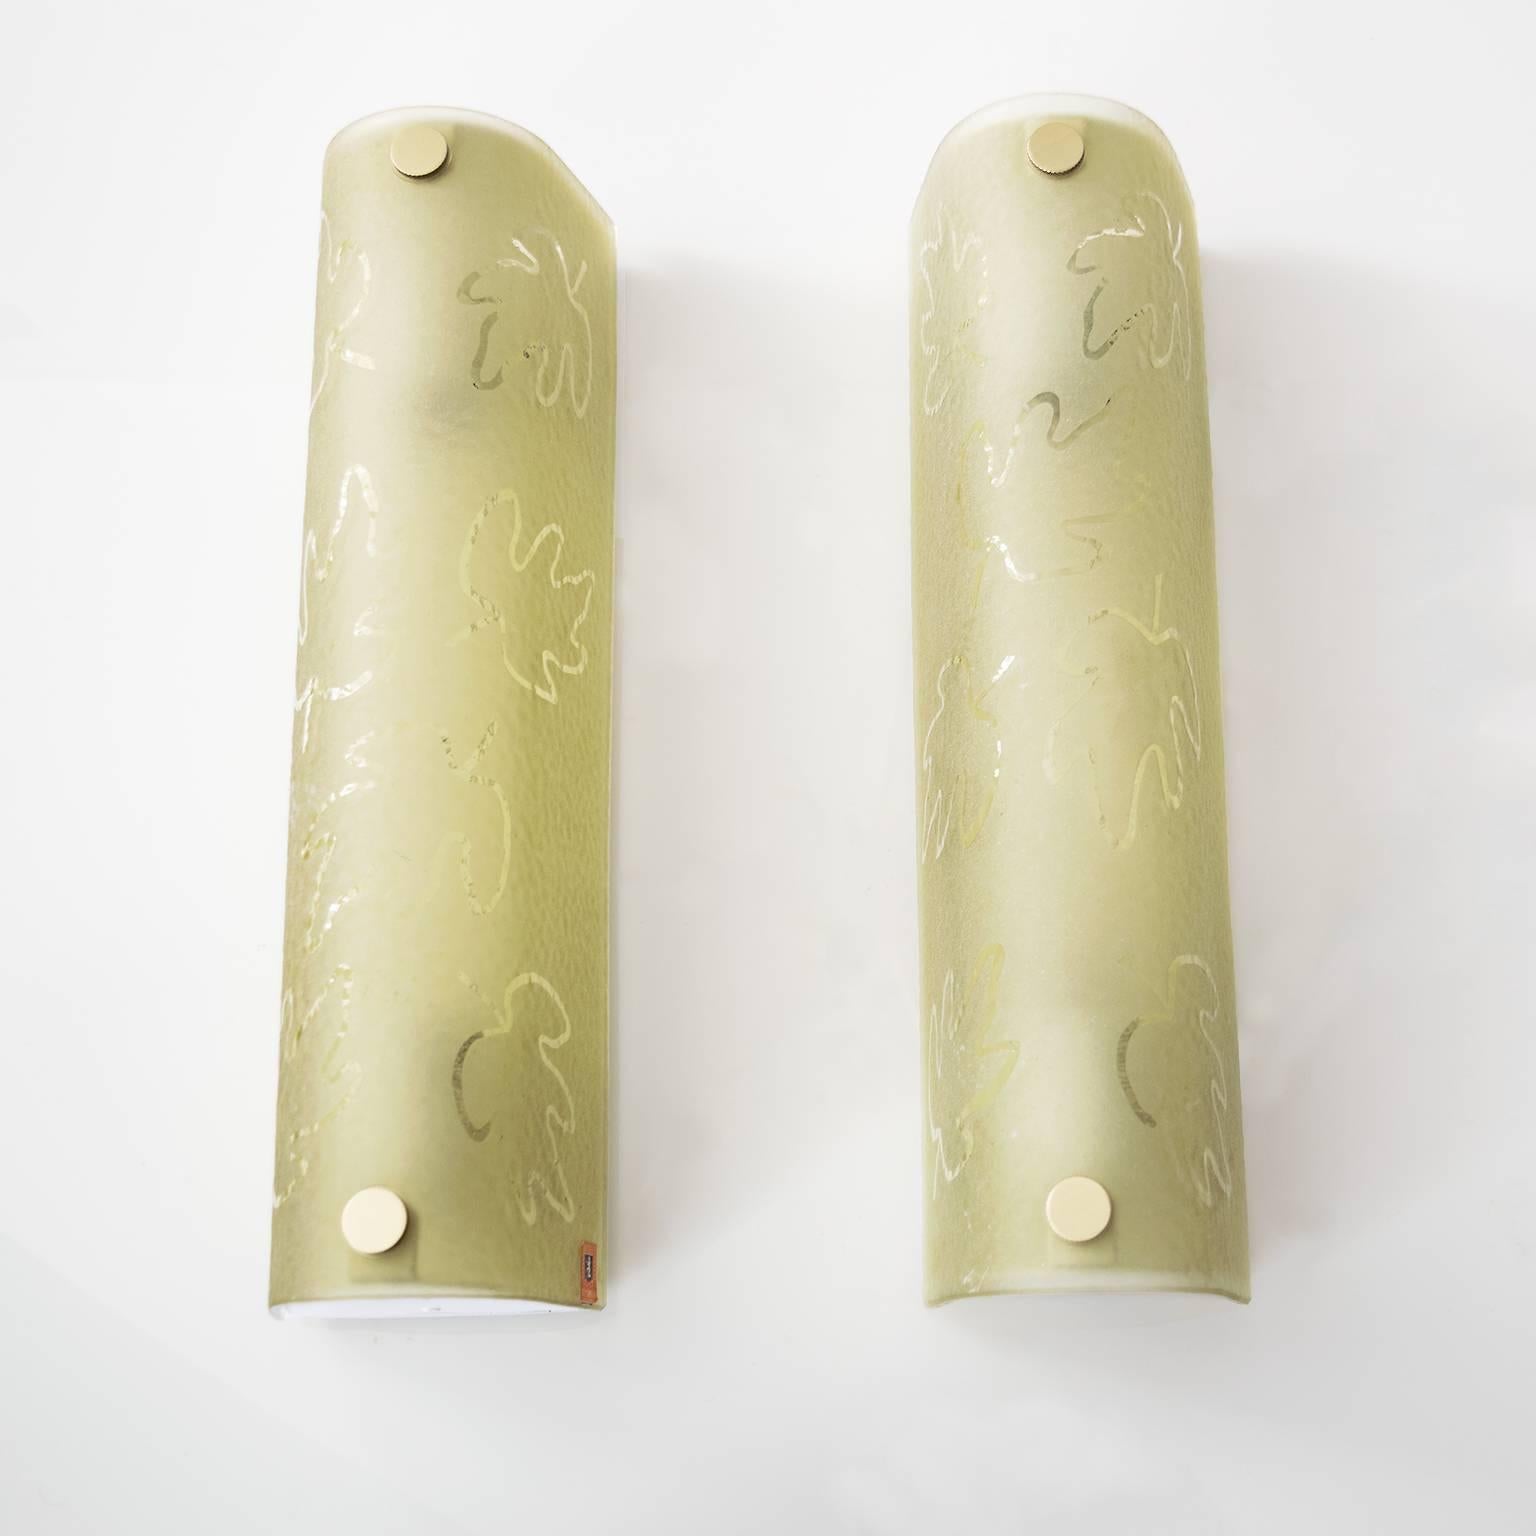 Pair of Scandinavian Modern bowed shaped etched glass sconces with leaf motif. The surface has a combination of acid and hand etched finish. Each sconce has two standard Edison sockets, newly rewired for use in the USA. Mounts are newly painted and